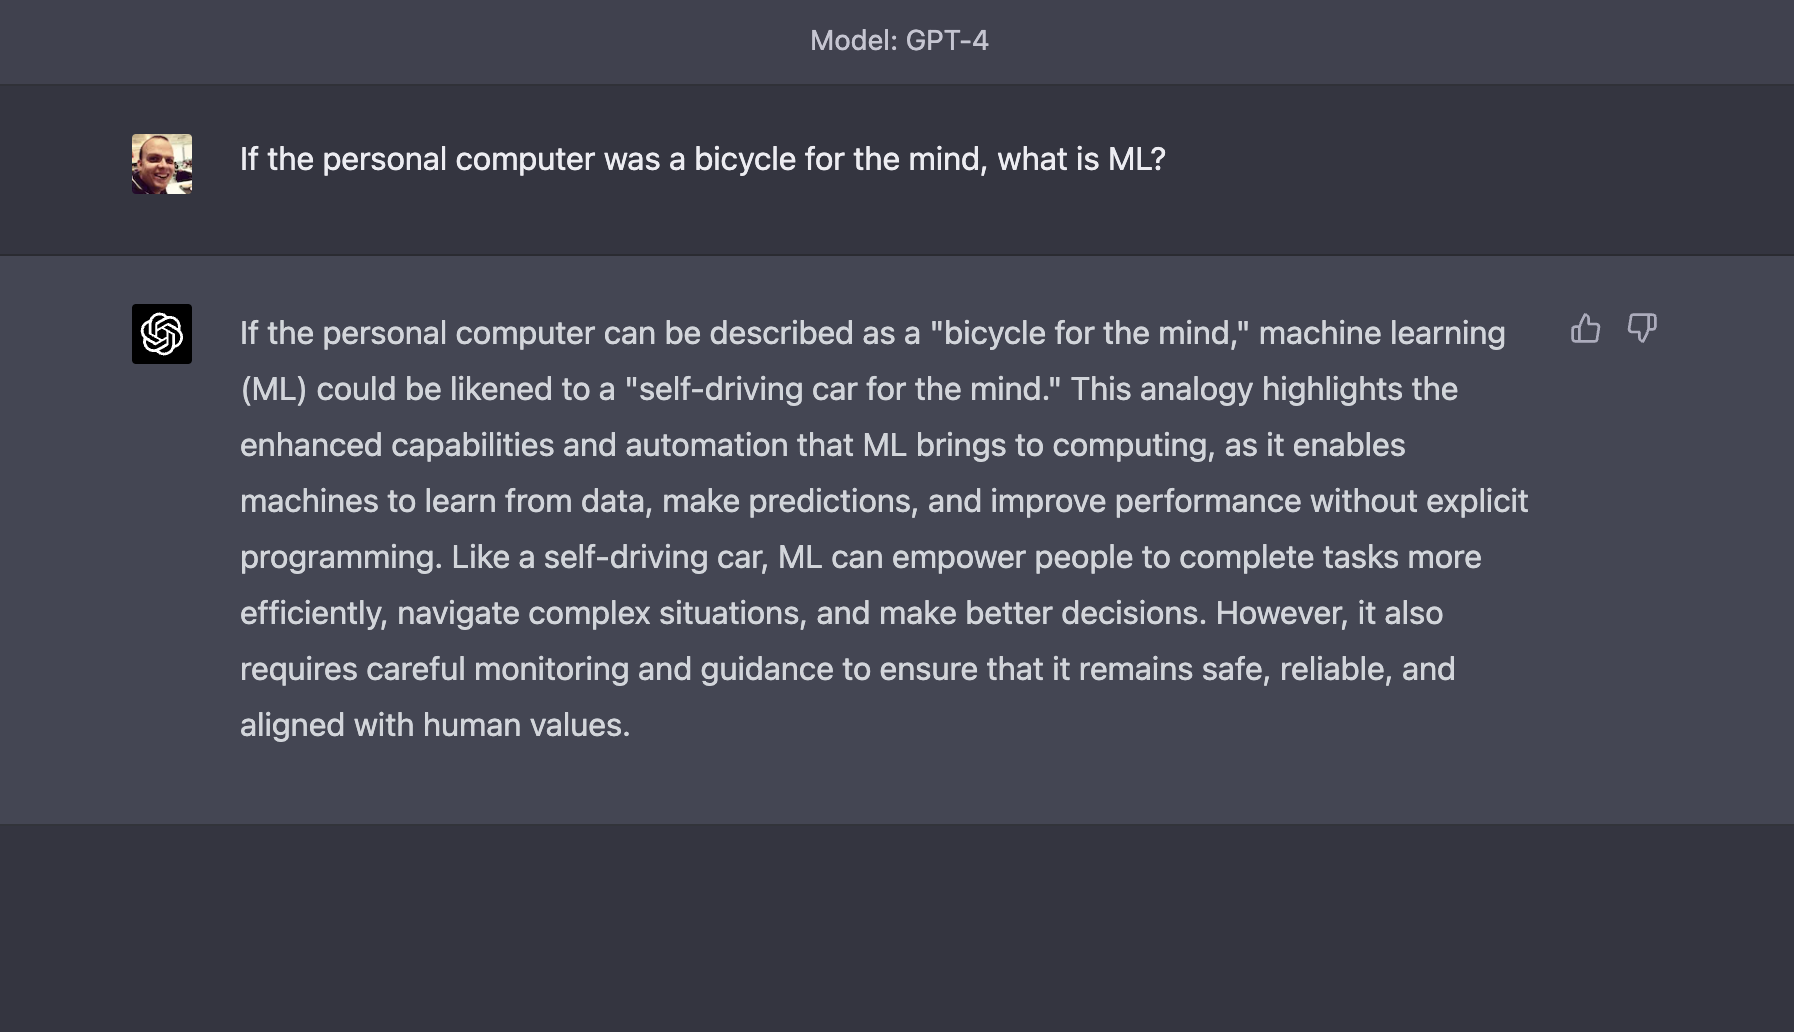 A description of what Chat GPT thinks ML is if a computer is a bicycle for the mind. A self-driving car.